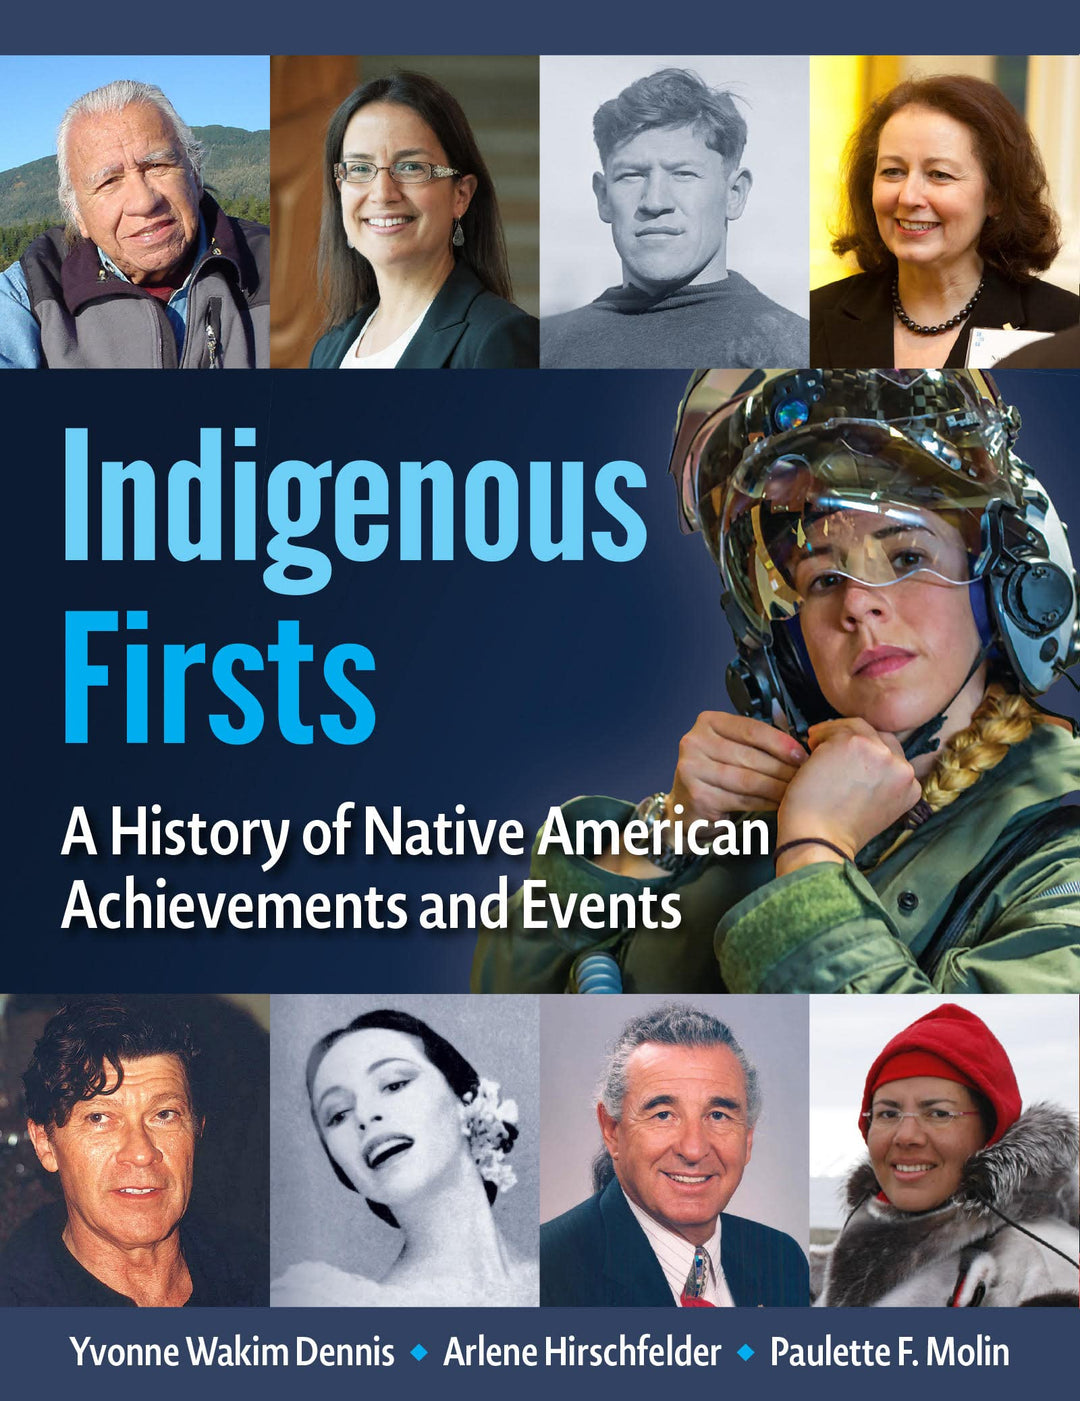 Indigenous Firsts: A History of Native American Achievements and Events by Yvonne Wakim Dennis et al.